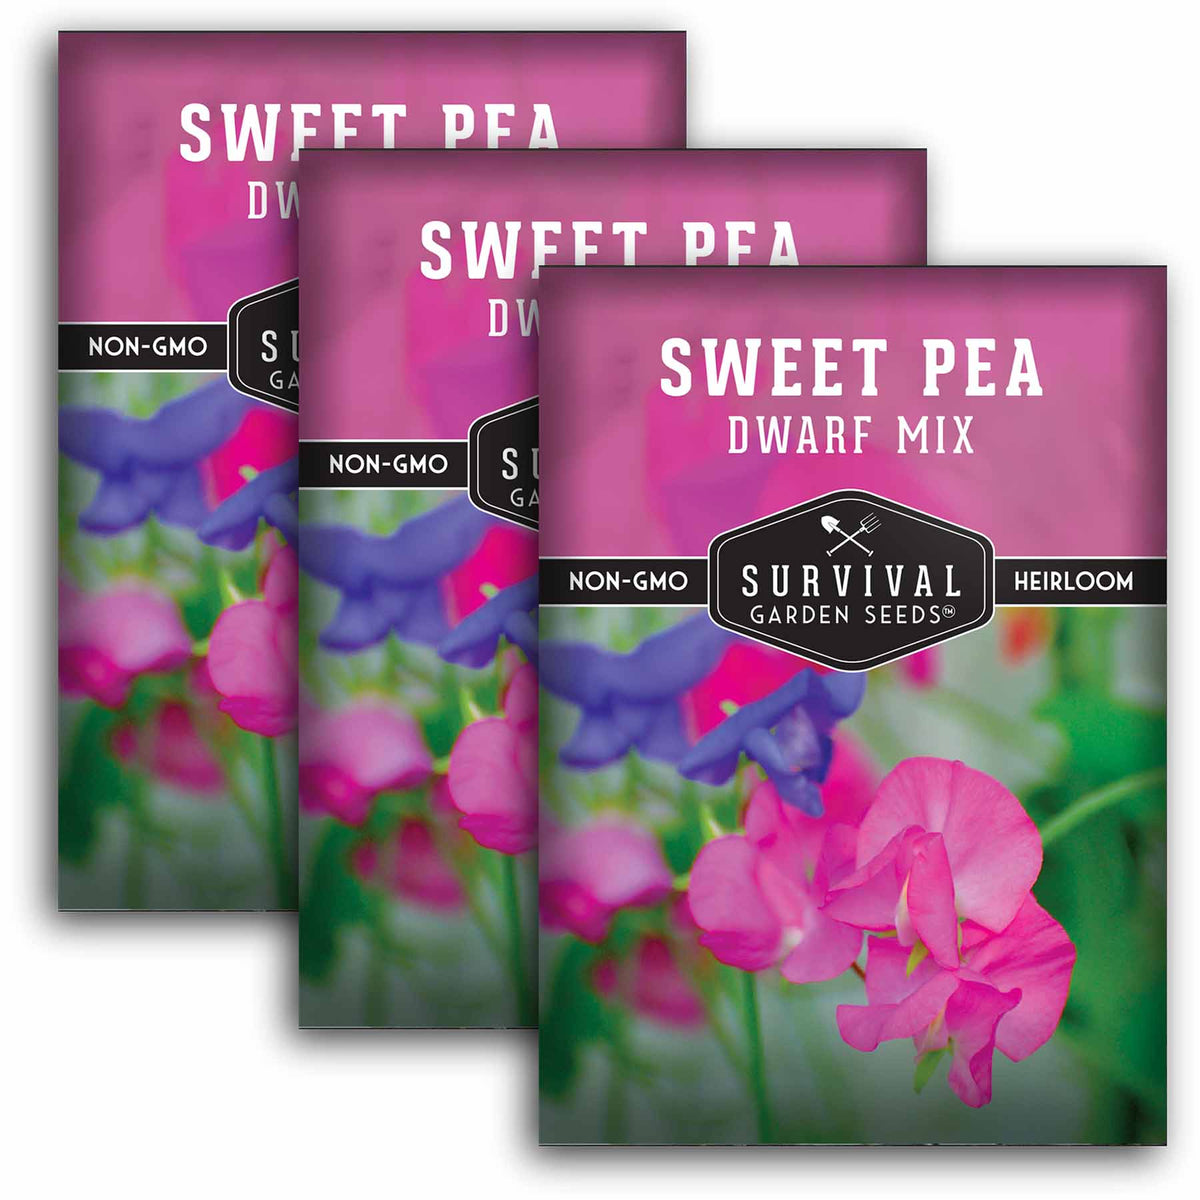 3 packets of Sweet Pea seeds